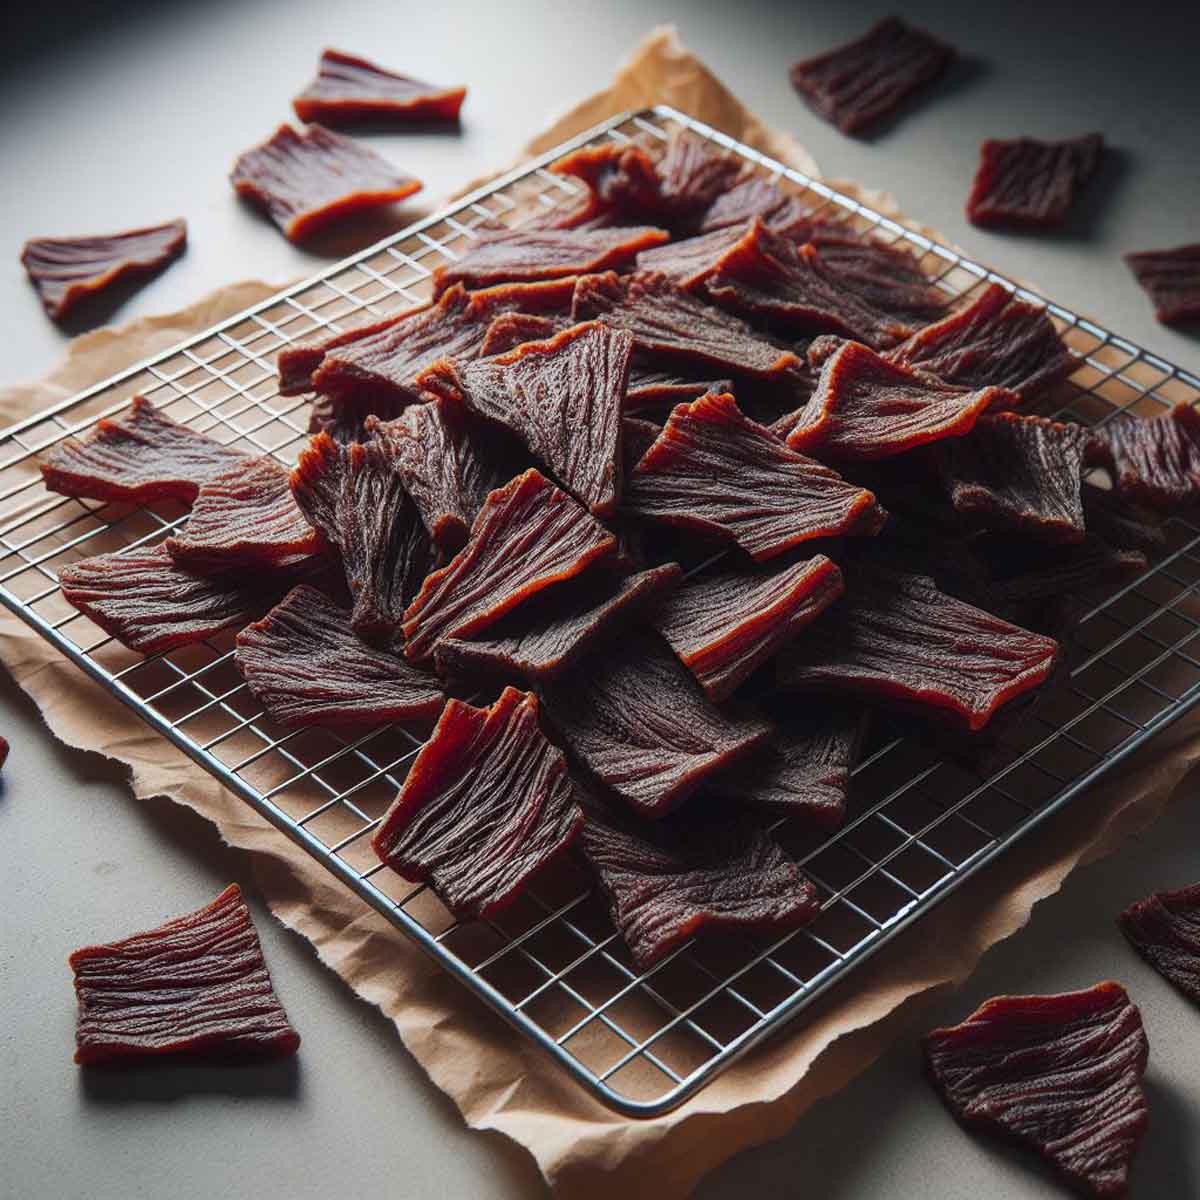 Freshly dehydrated beef jerky cooling on a wire rack, highlighting its even texture.